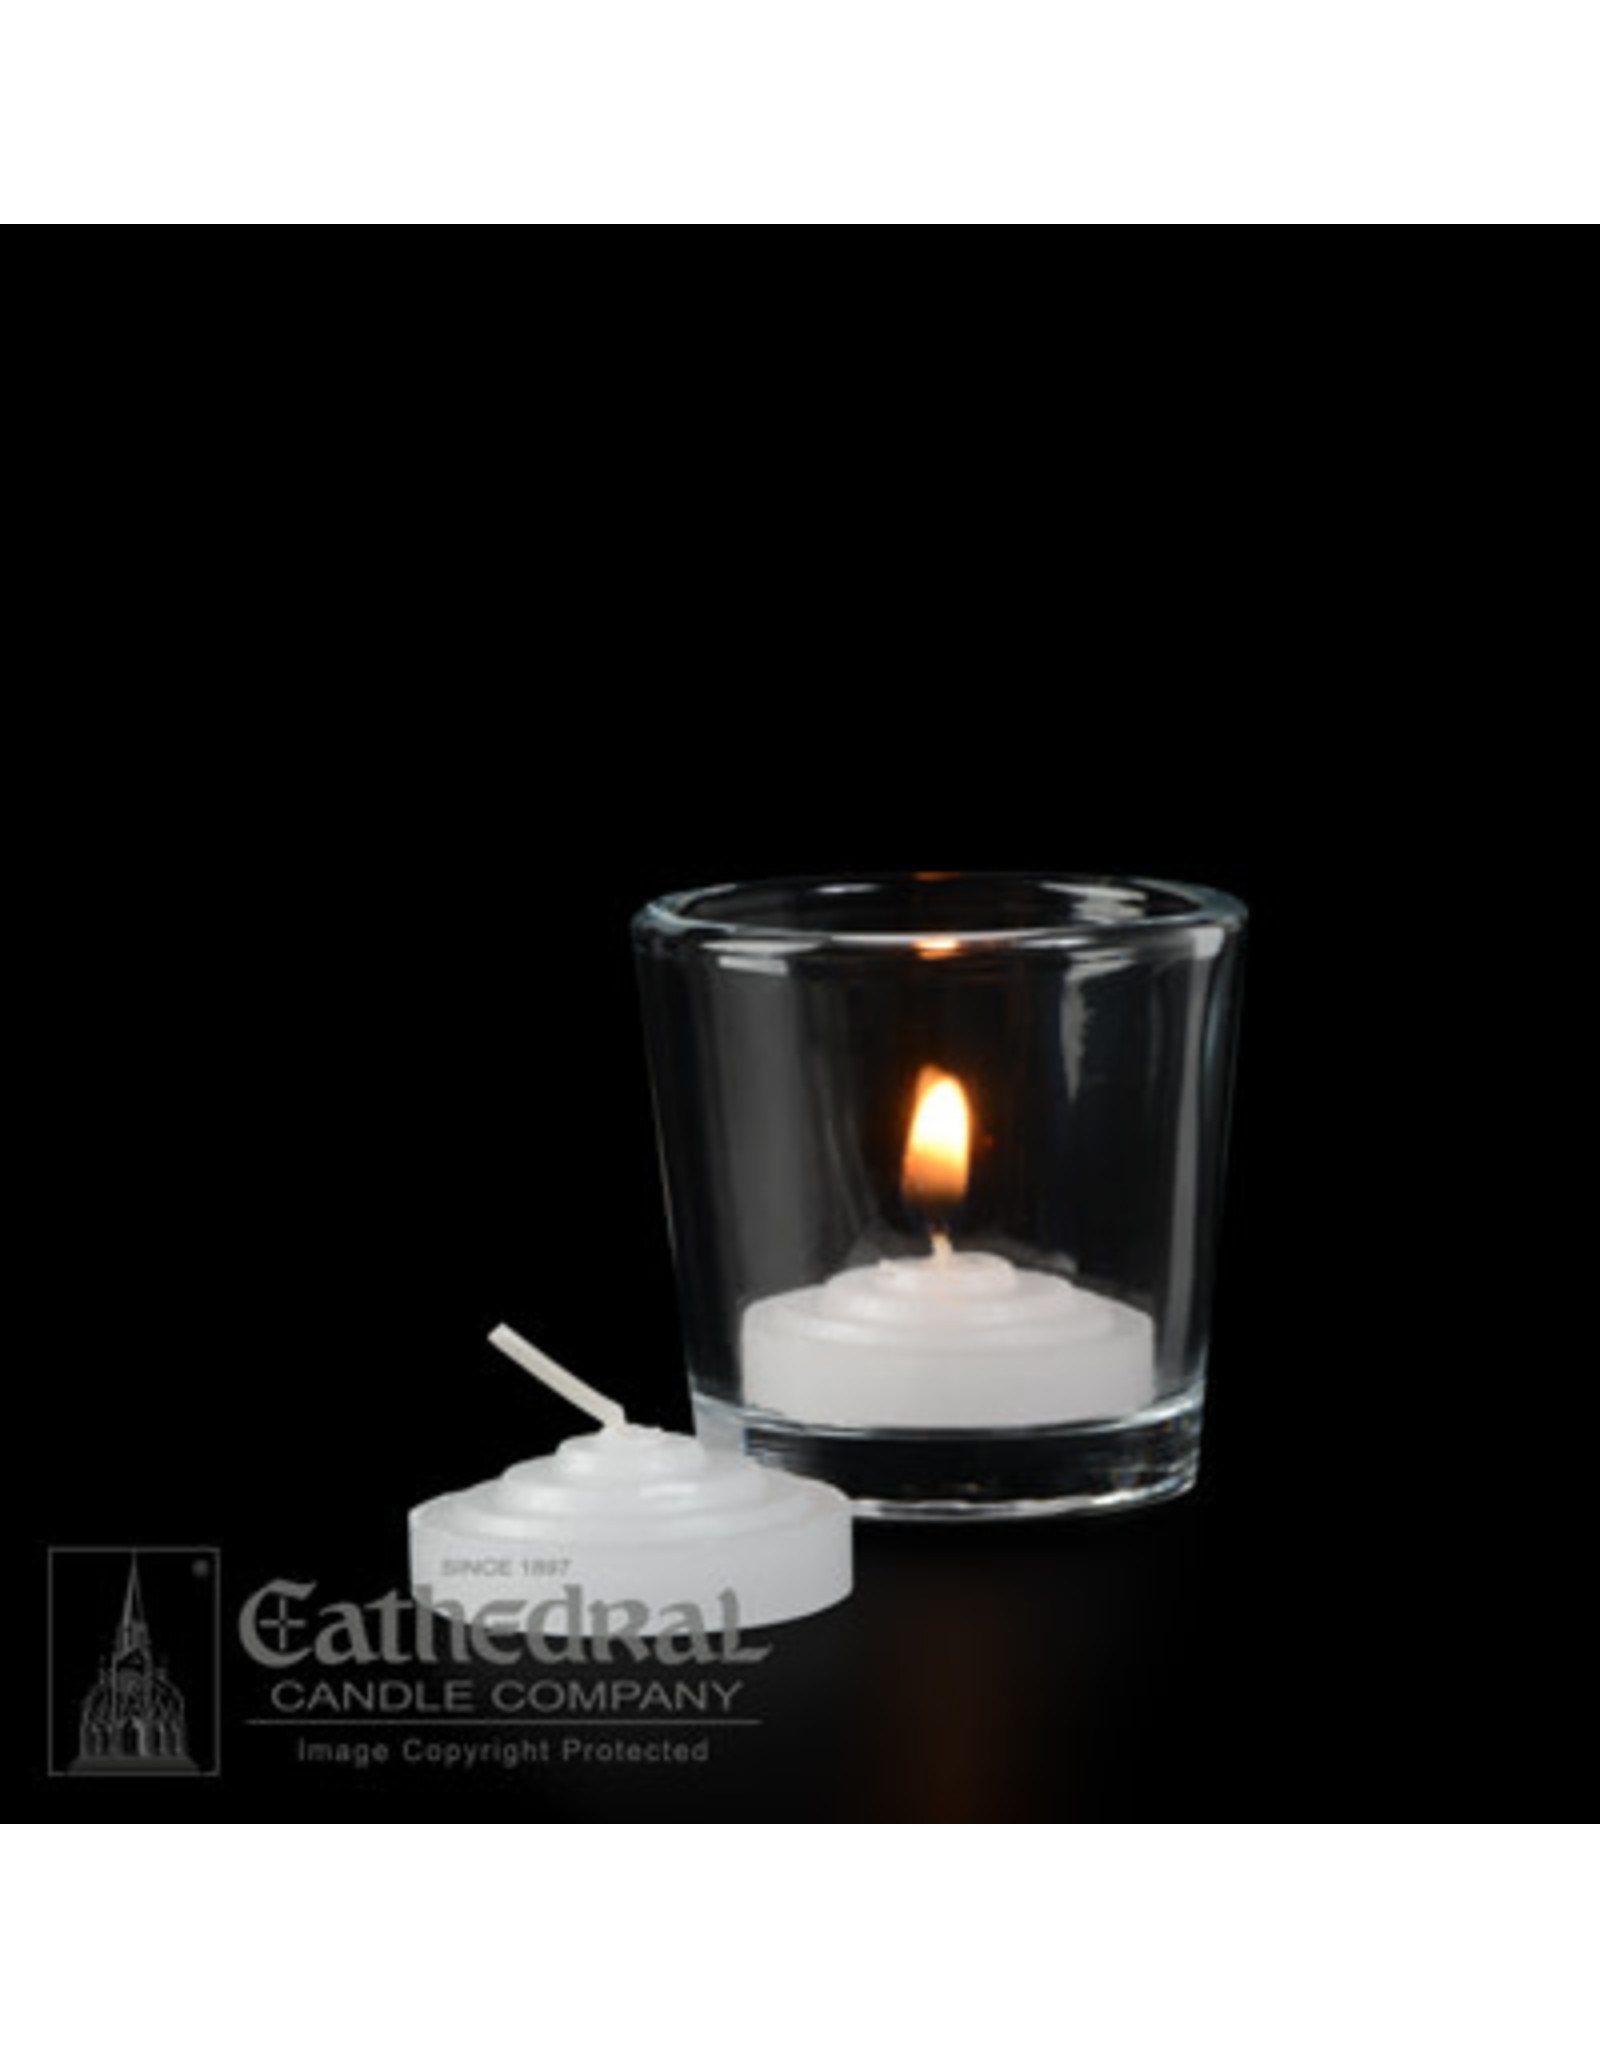 Cathedral Candle 2-Hour Votive Candles (Box of 288)